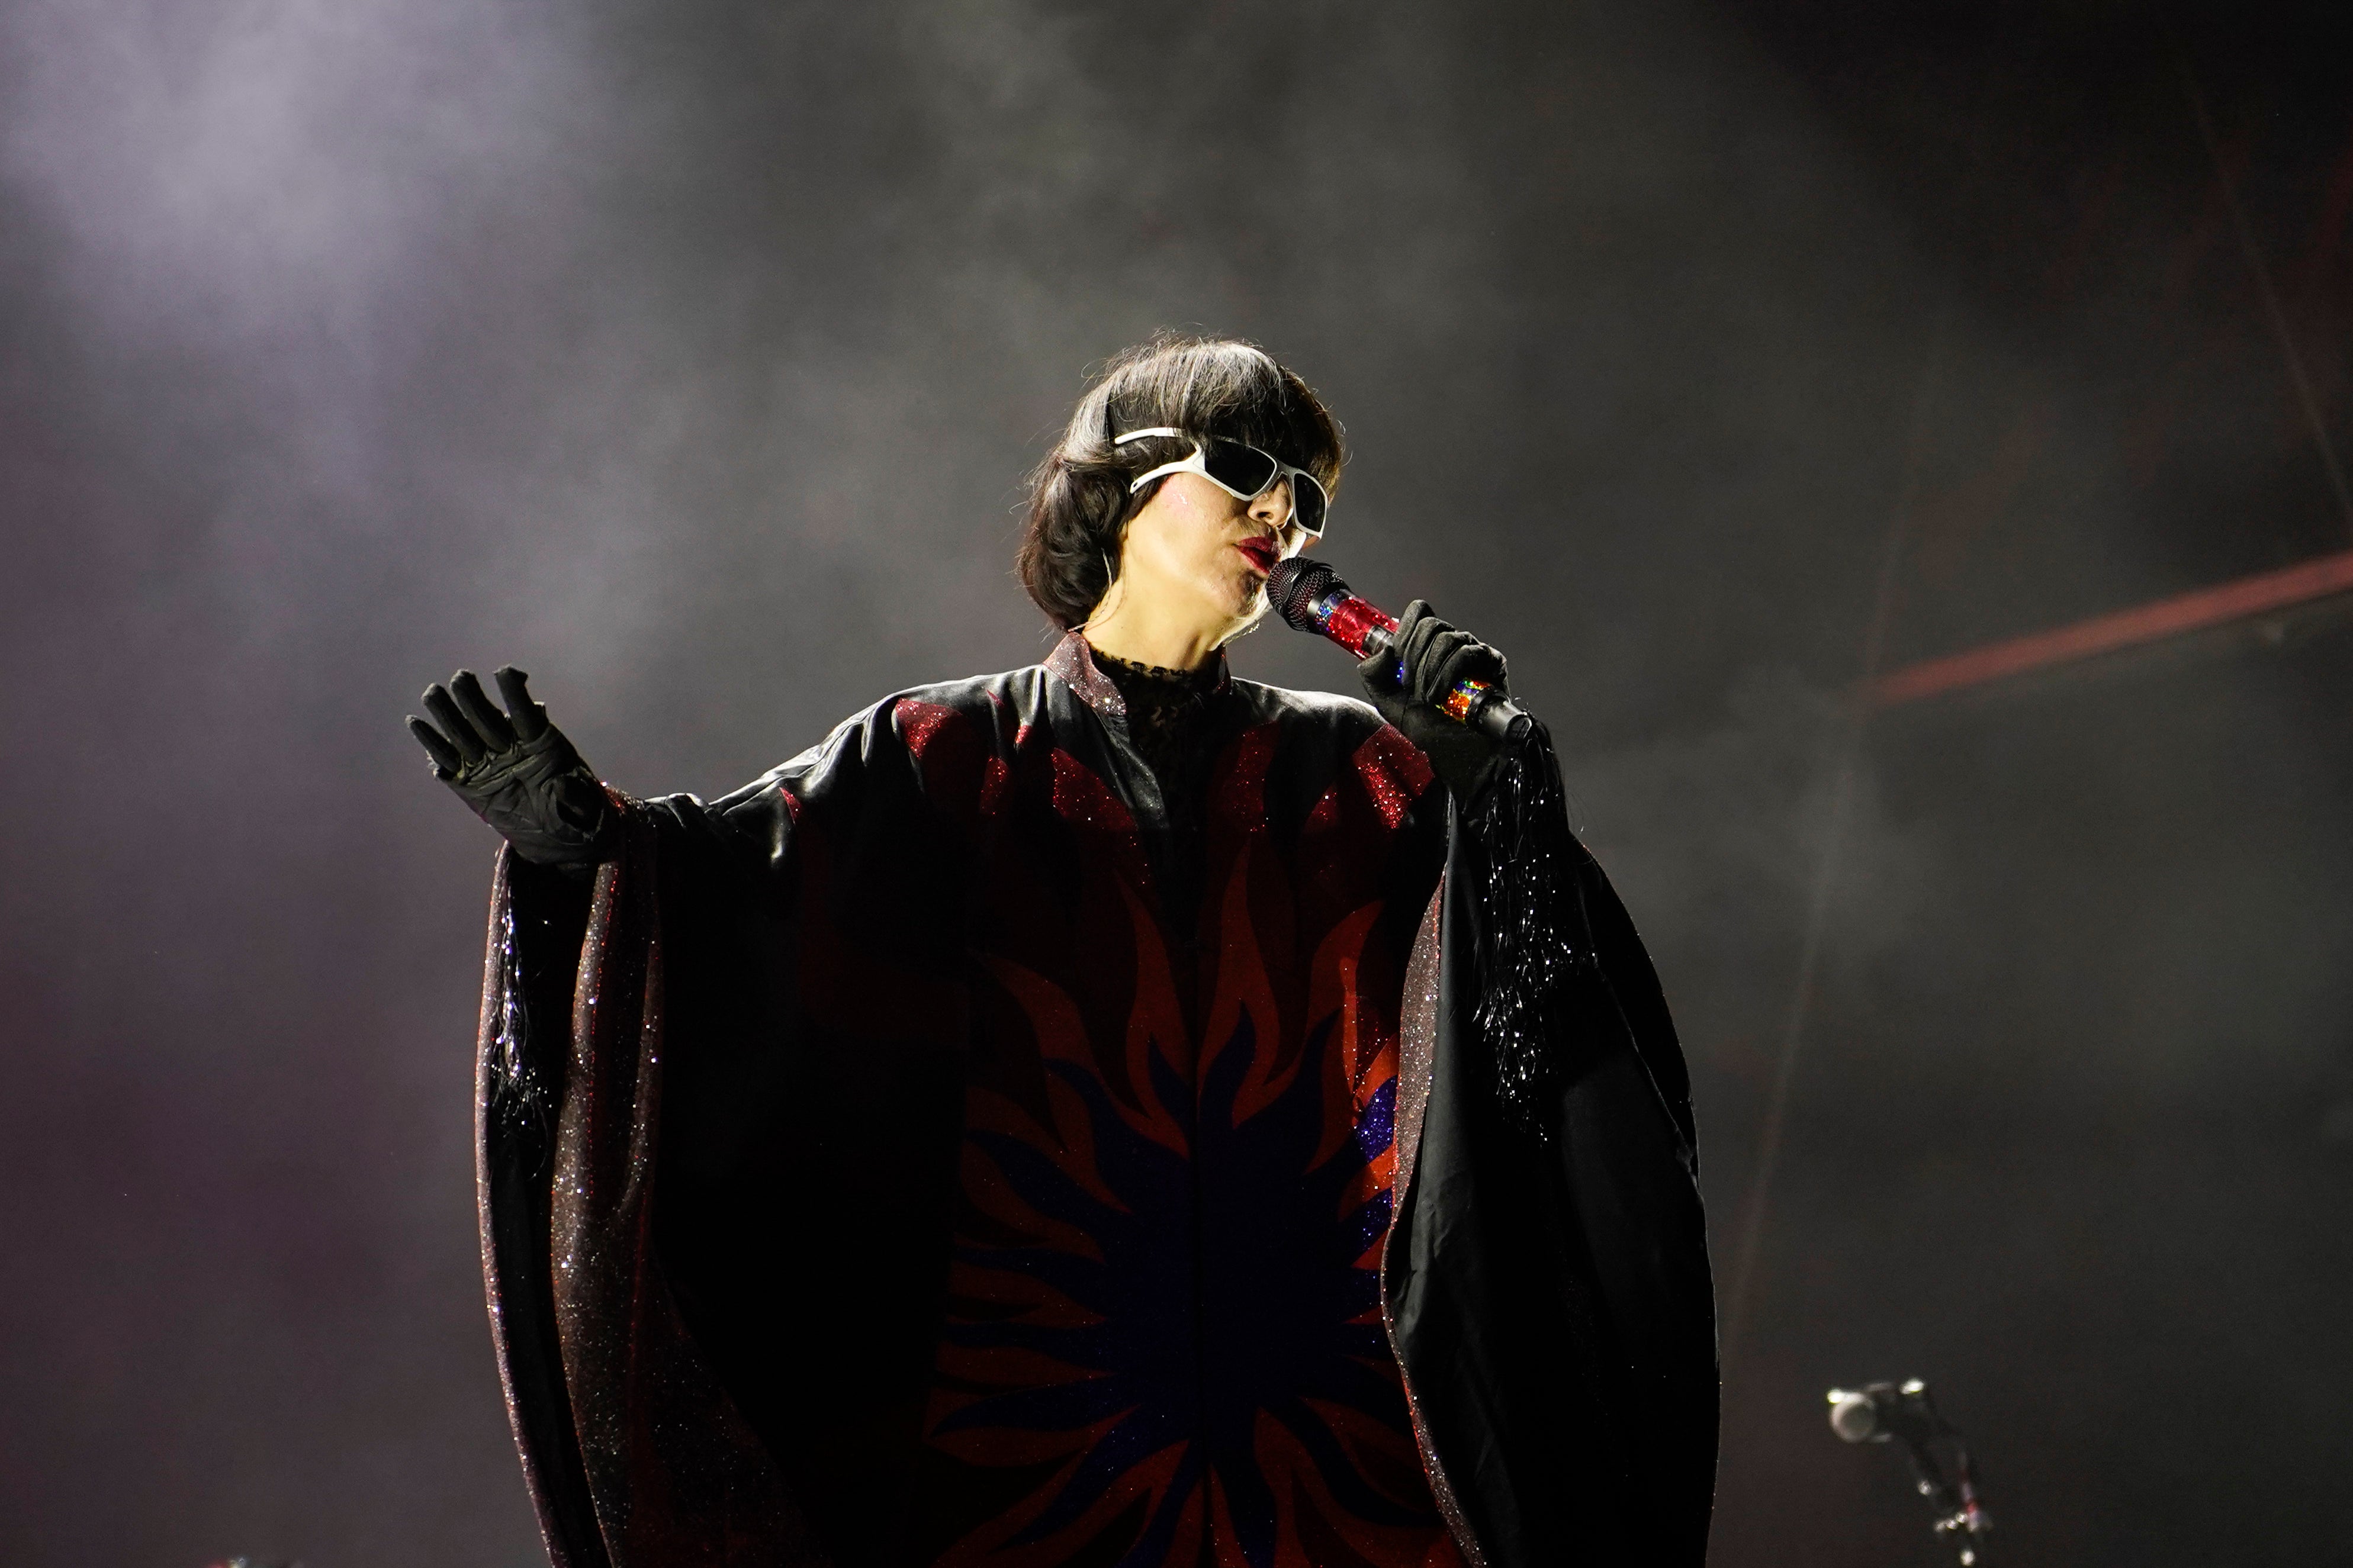 <p>Singer Karen O still has a loaded arsenal of rock-star moves 23 years into the game</p>